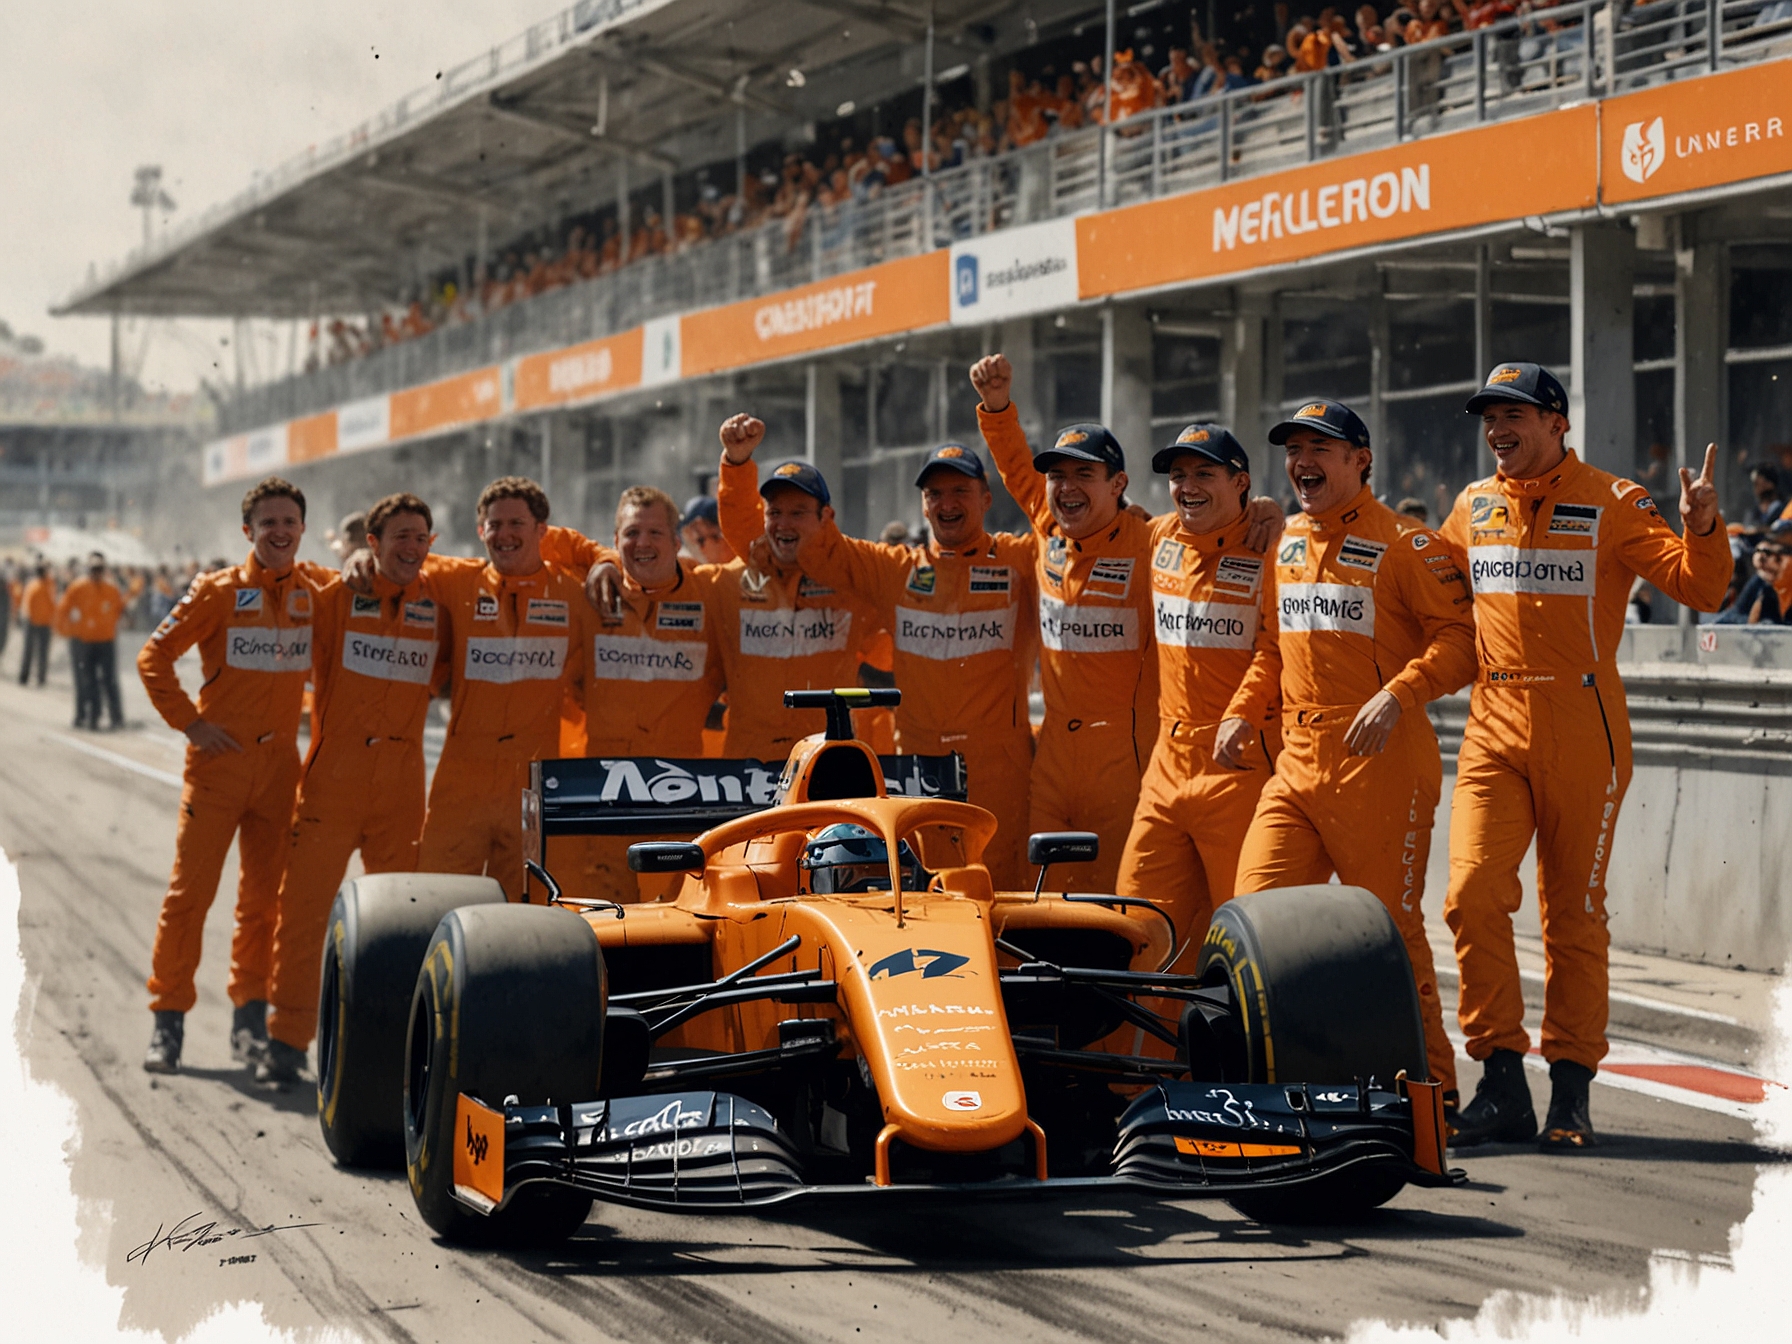 Lando Norris celebrating his pole position alongside the McLaren team, showcasing their joy and triumph at the Circuit de Barcelona-Catalunya after a remarkable qualifying session.